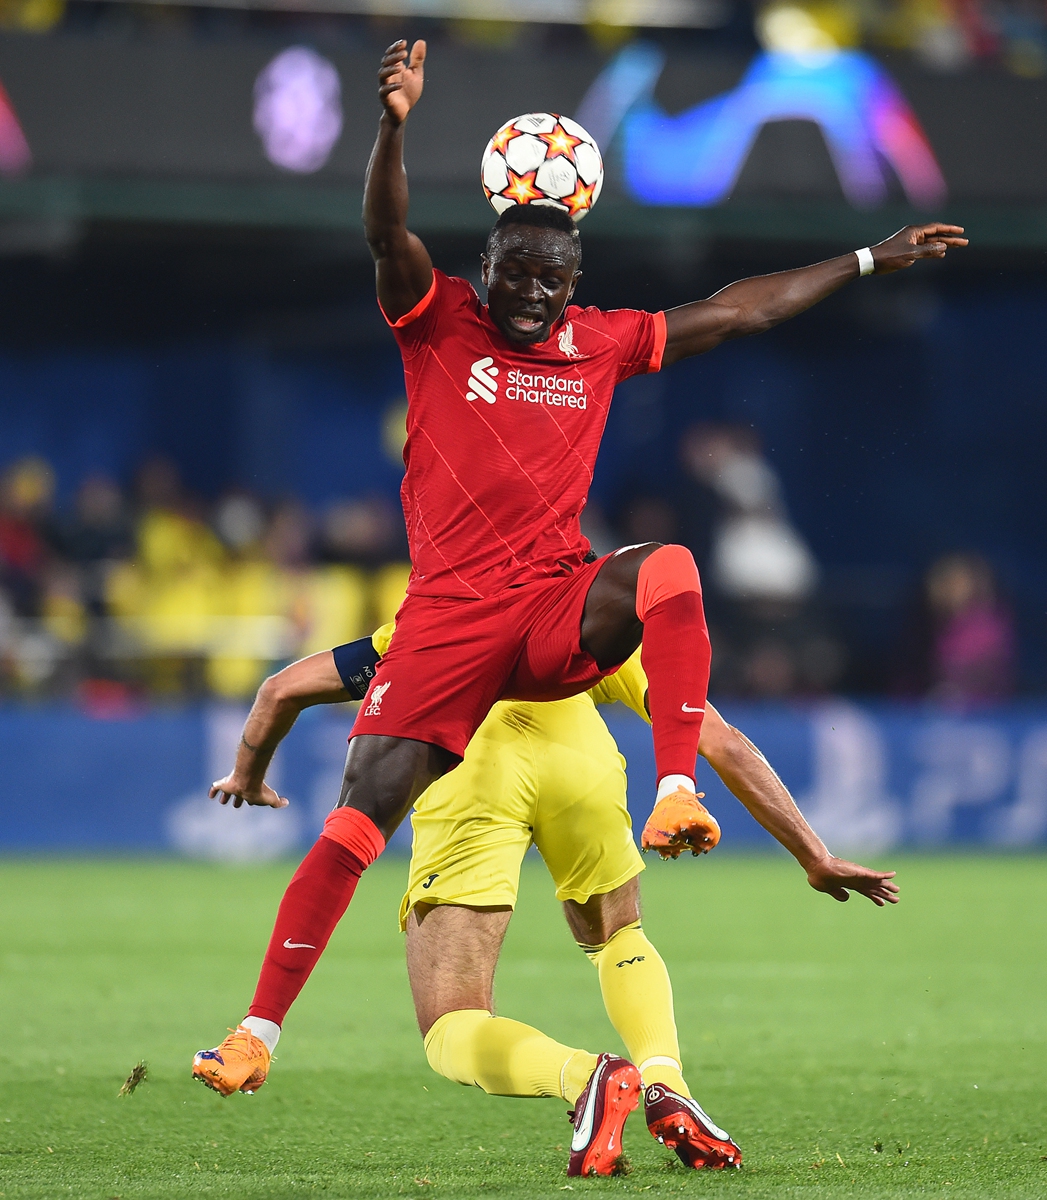 Sadio Mane of Liverpool competes for a header during the UEFA Champions League semifinal second-leg match between Villarreal and Liverpool at Estadio de la Ceramica on May 3, 2022 in Villarreal, Spain. Photo: VCG